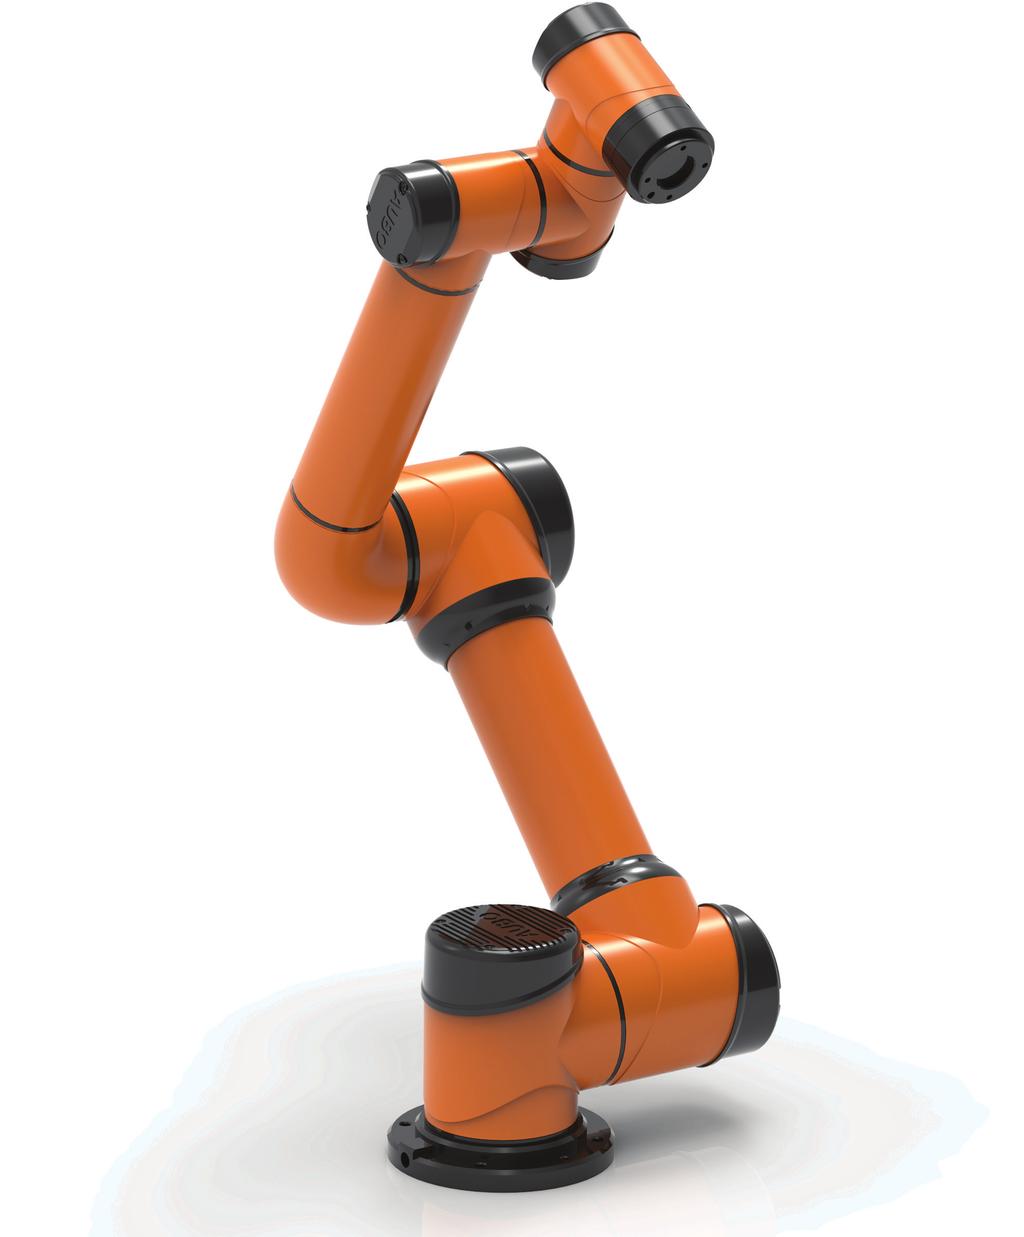 AUBO-i5 Collaborative Robot (Co-Bot) 6 axis 5Kg payload